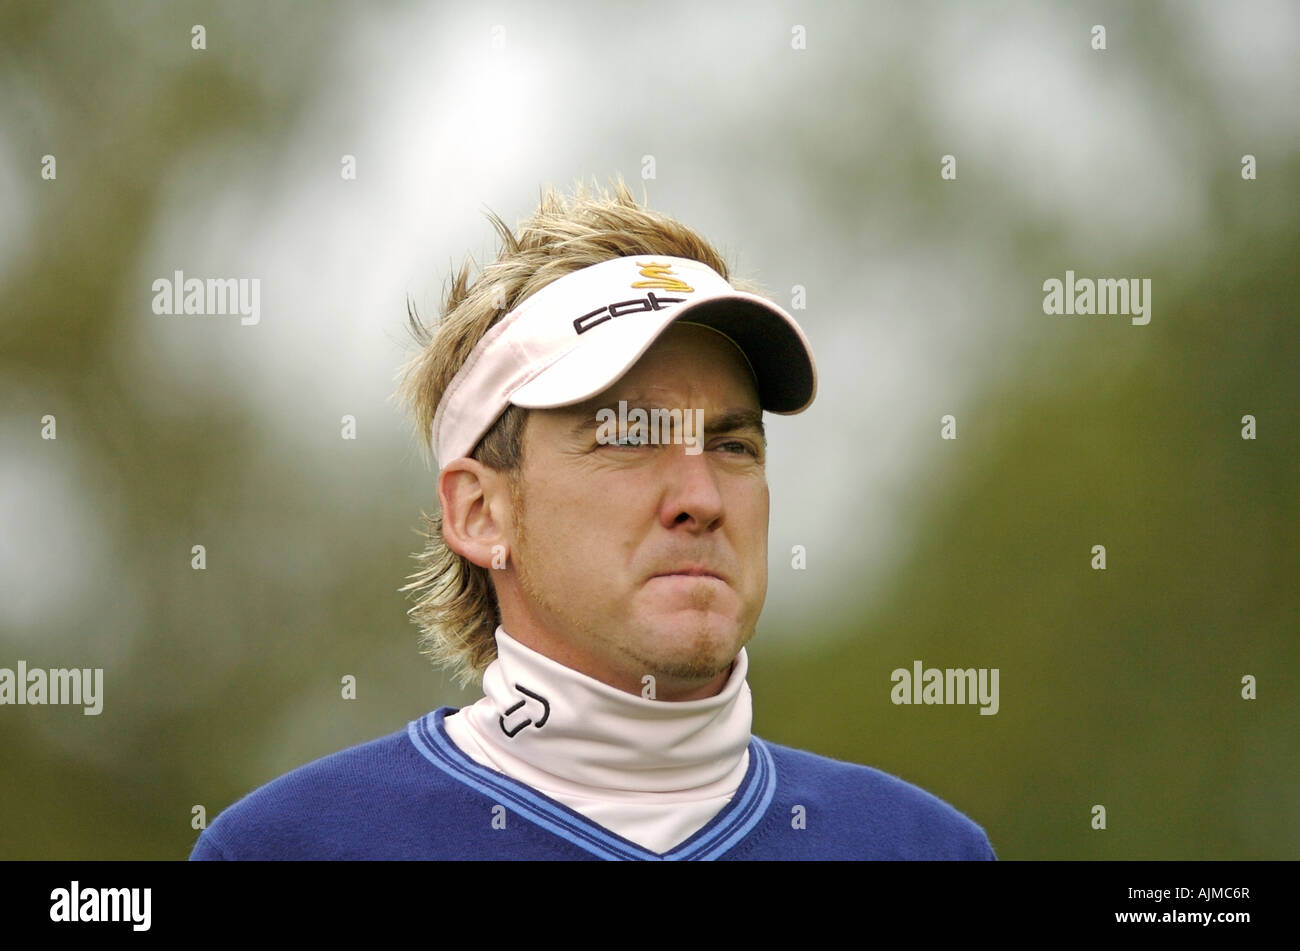 Ian Poulter during the Quinn Direct British Masters Stock Photo